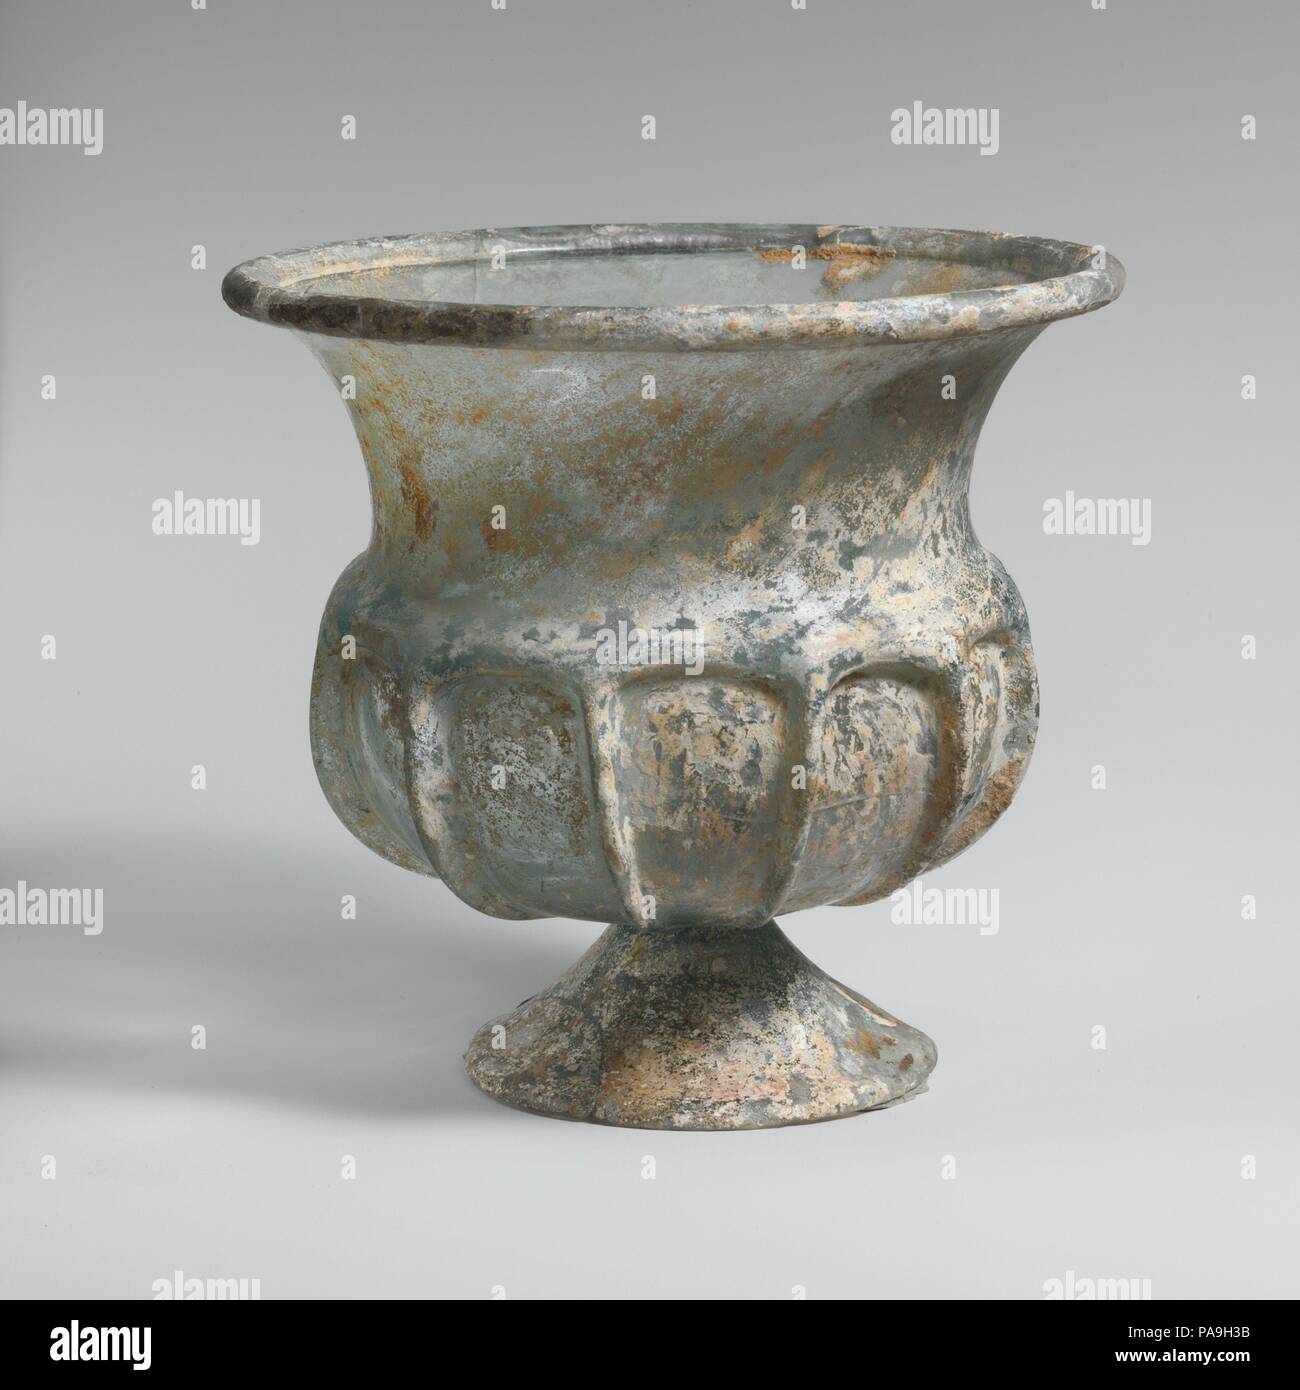 Glass cup with splayed foot. Culture: Roman. Dimensions: H. 5 3/16 in. (13.2 cm); diameter  5 9/16 in. (14.1 cm). Date: 2nd half of 1st century A.D..  Translucent blue green.  Outsplayed tubular rim, folded over and in; tall curving neck, tapering downwards; thick projecting shoulder; squat, globular body; applied conical foot, formed from a separate gather, with edge cracked-off and ground flat; small, circular, flat bottom.  Eleven vertical ribs in high relief tooled out from shoulder down side of body.  Rim and body cracked with one hole in side; part of foot broken and missing; few bubbles Stock Photo